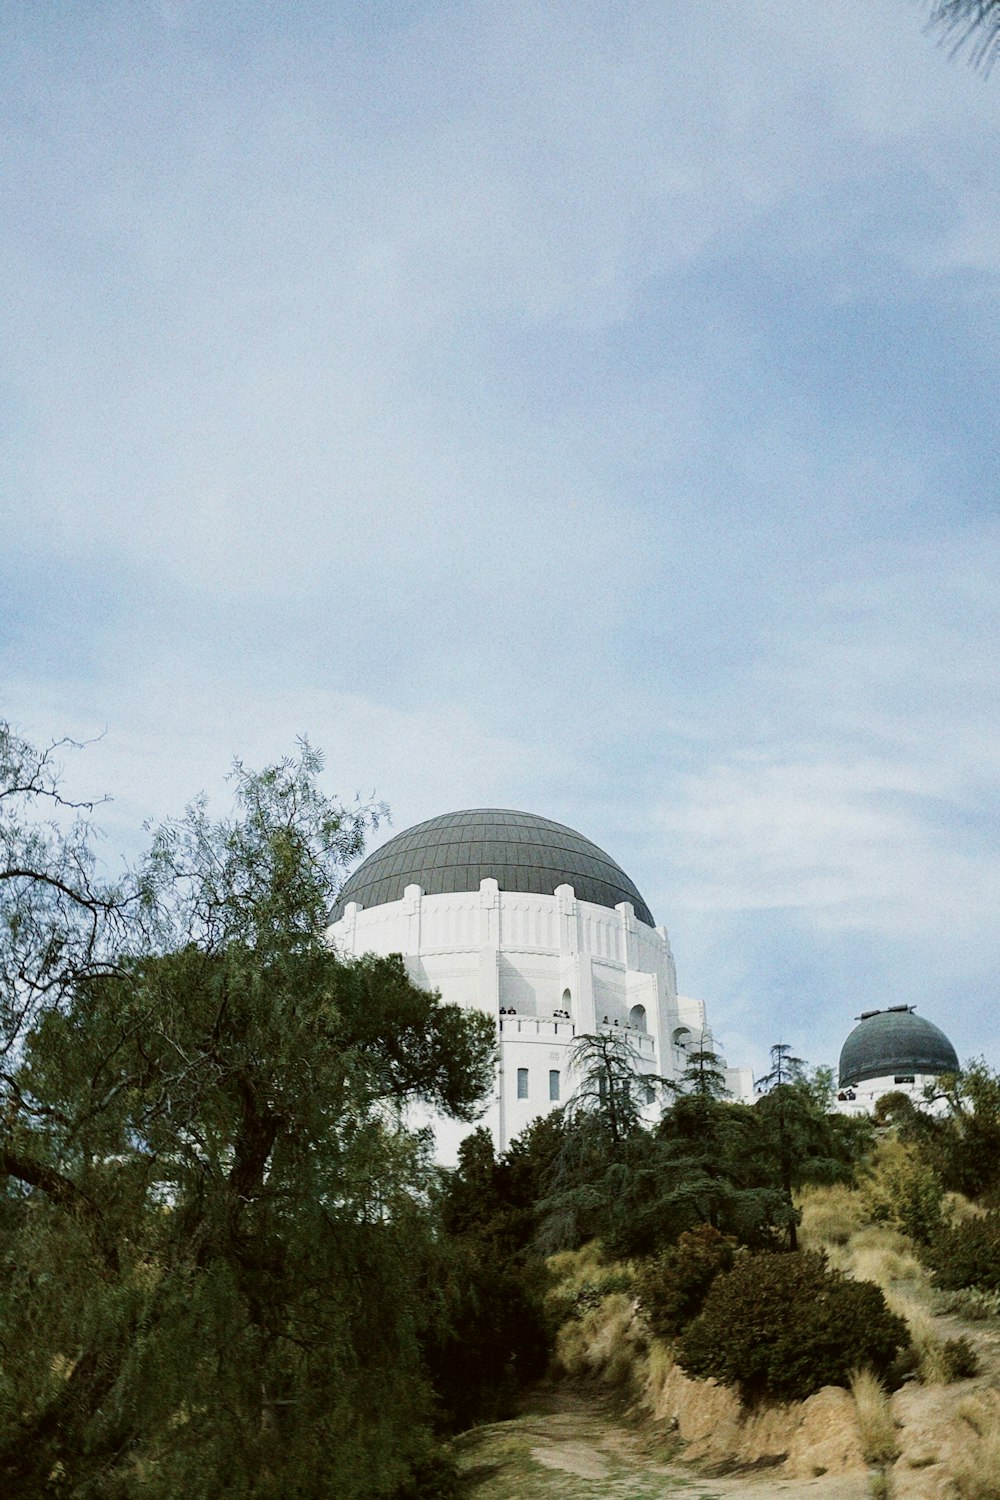 a large dome on top of a building surrounded by trees